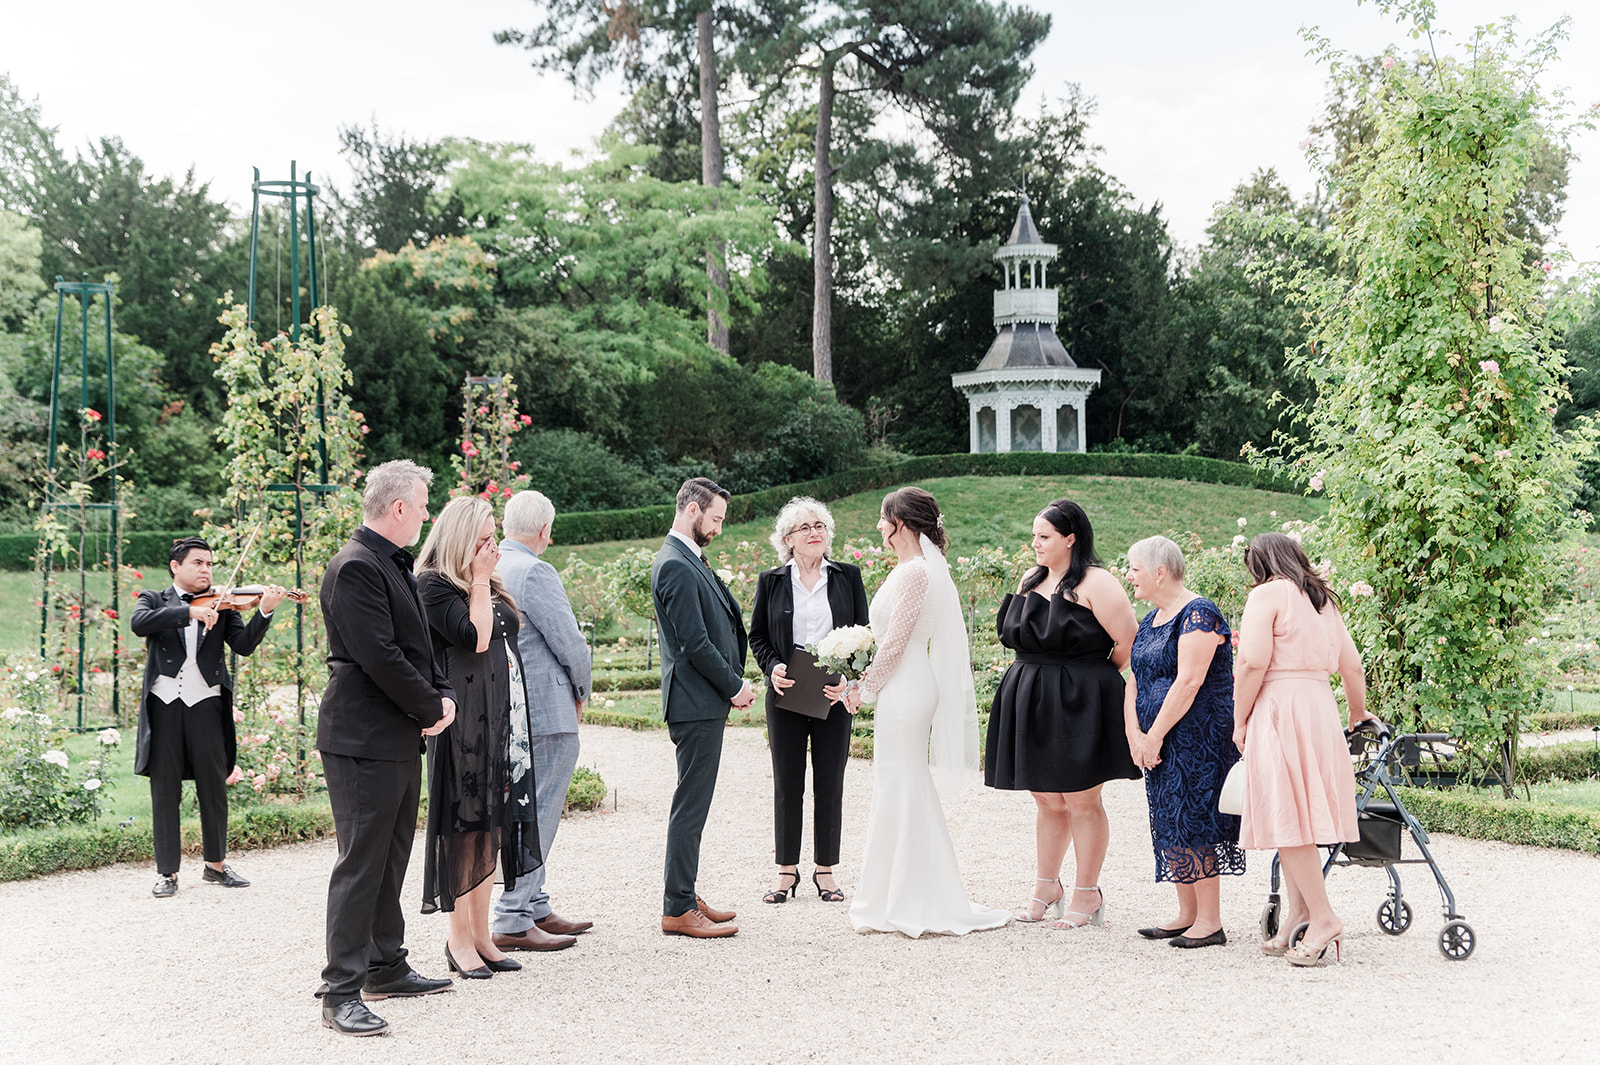 All the family gathered around bride and groom at Parc de bagatelle for the ceremony